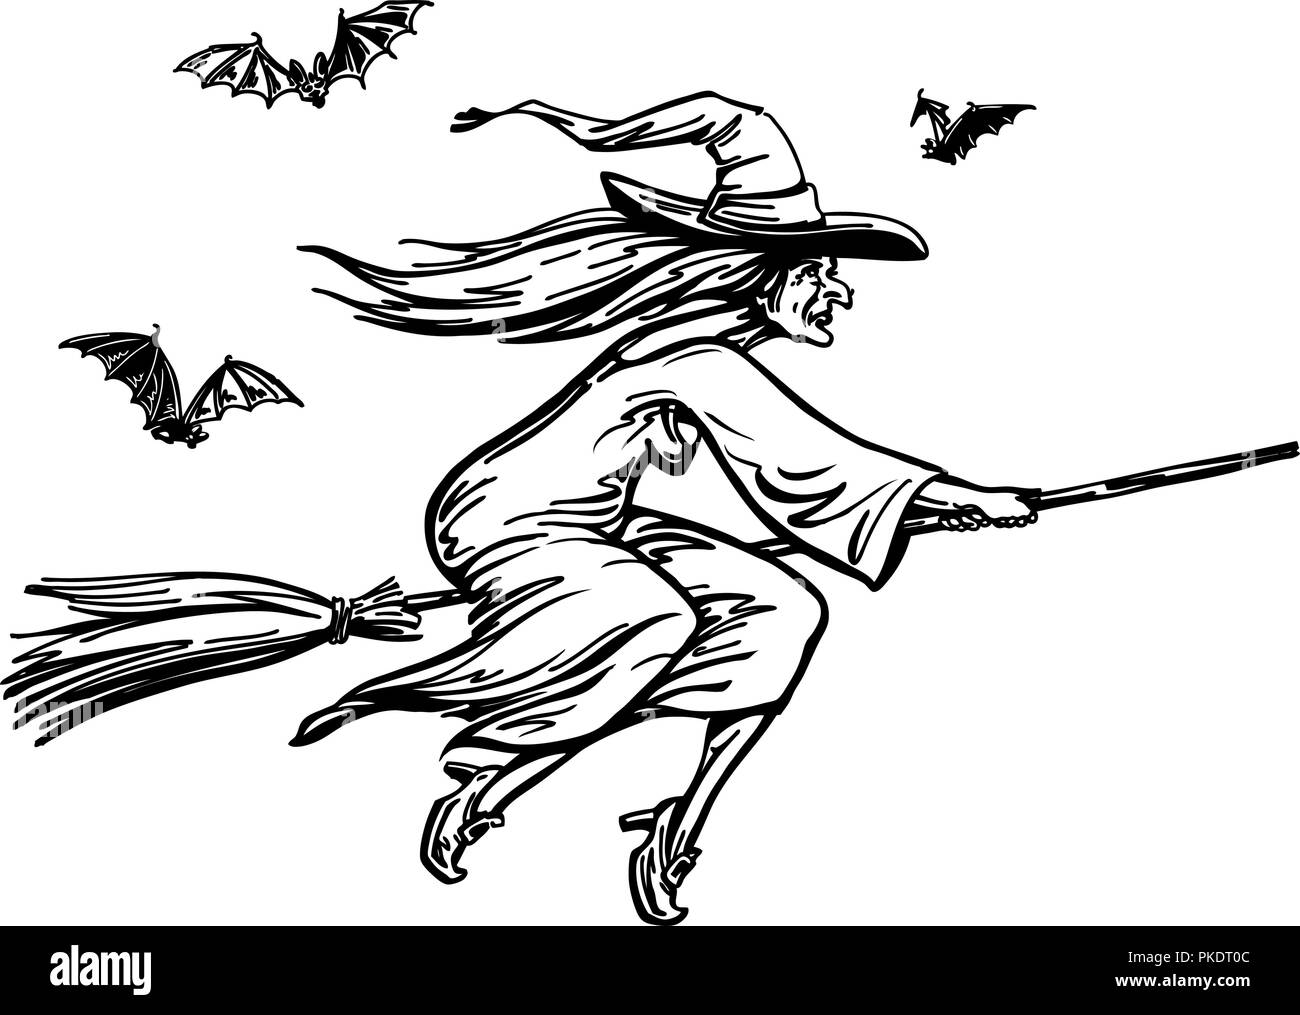 Witch Flying On Broomstick Halloween Sketch Vector Illustration Stock Vector Image Art Alamy